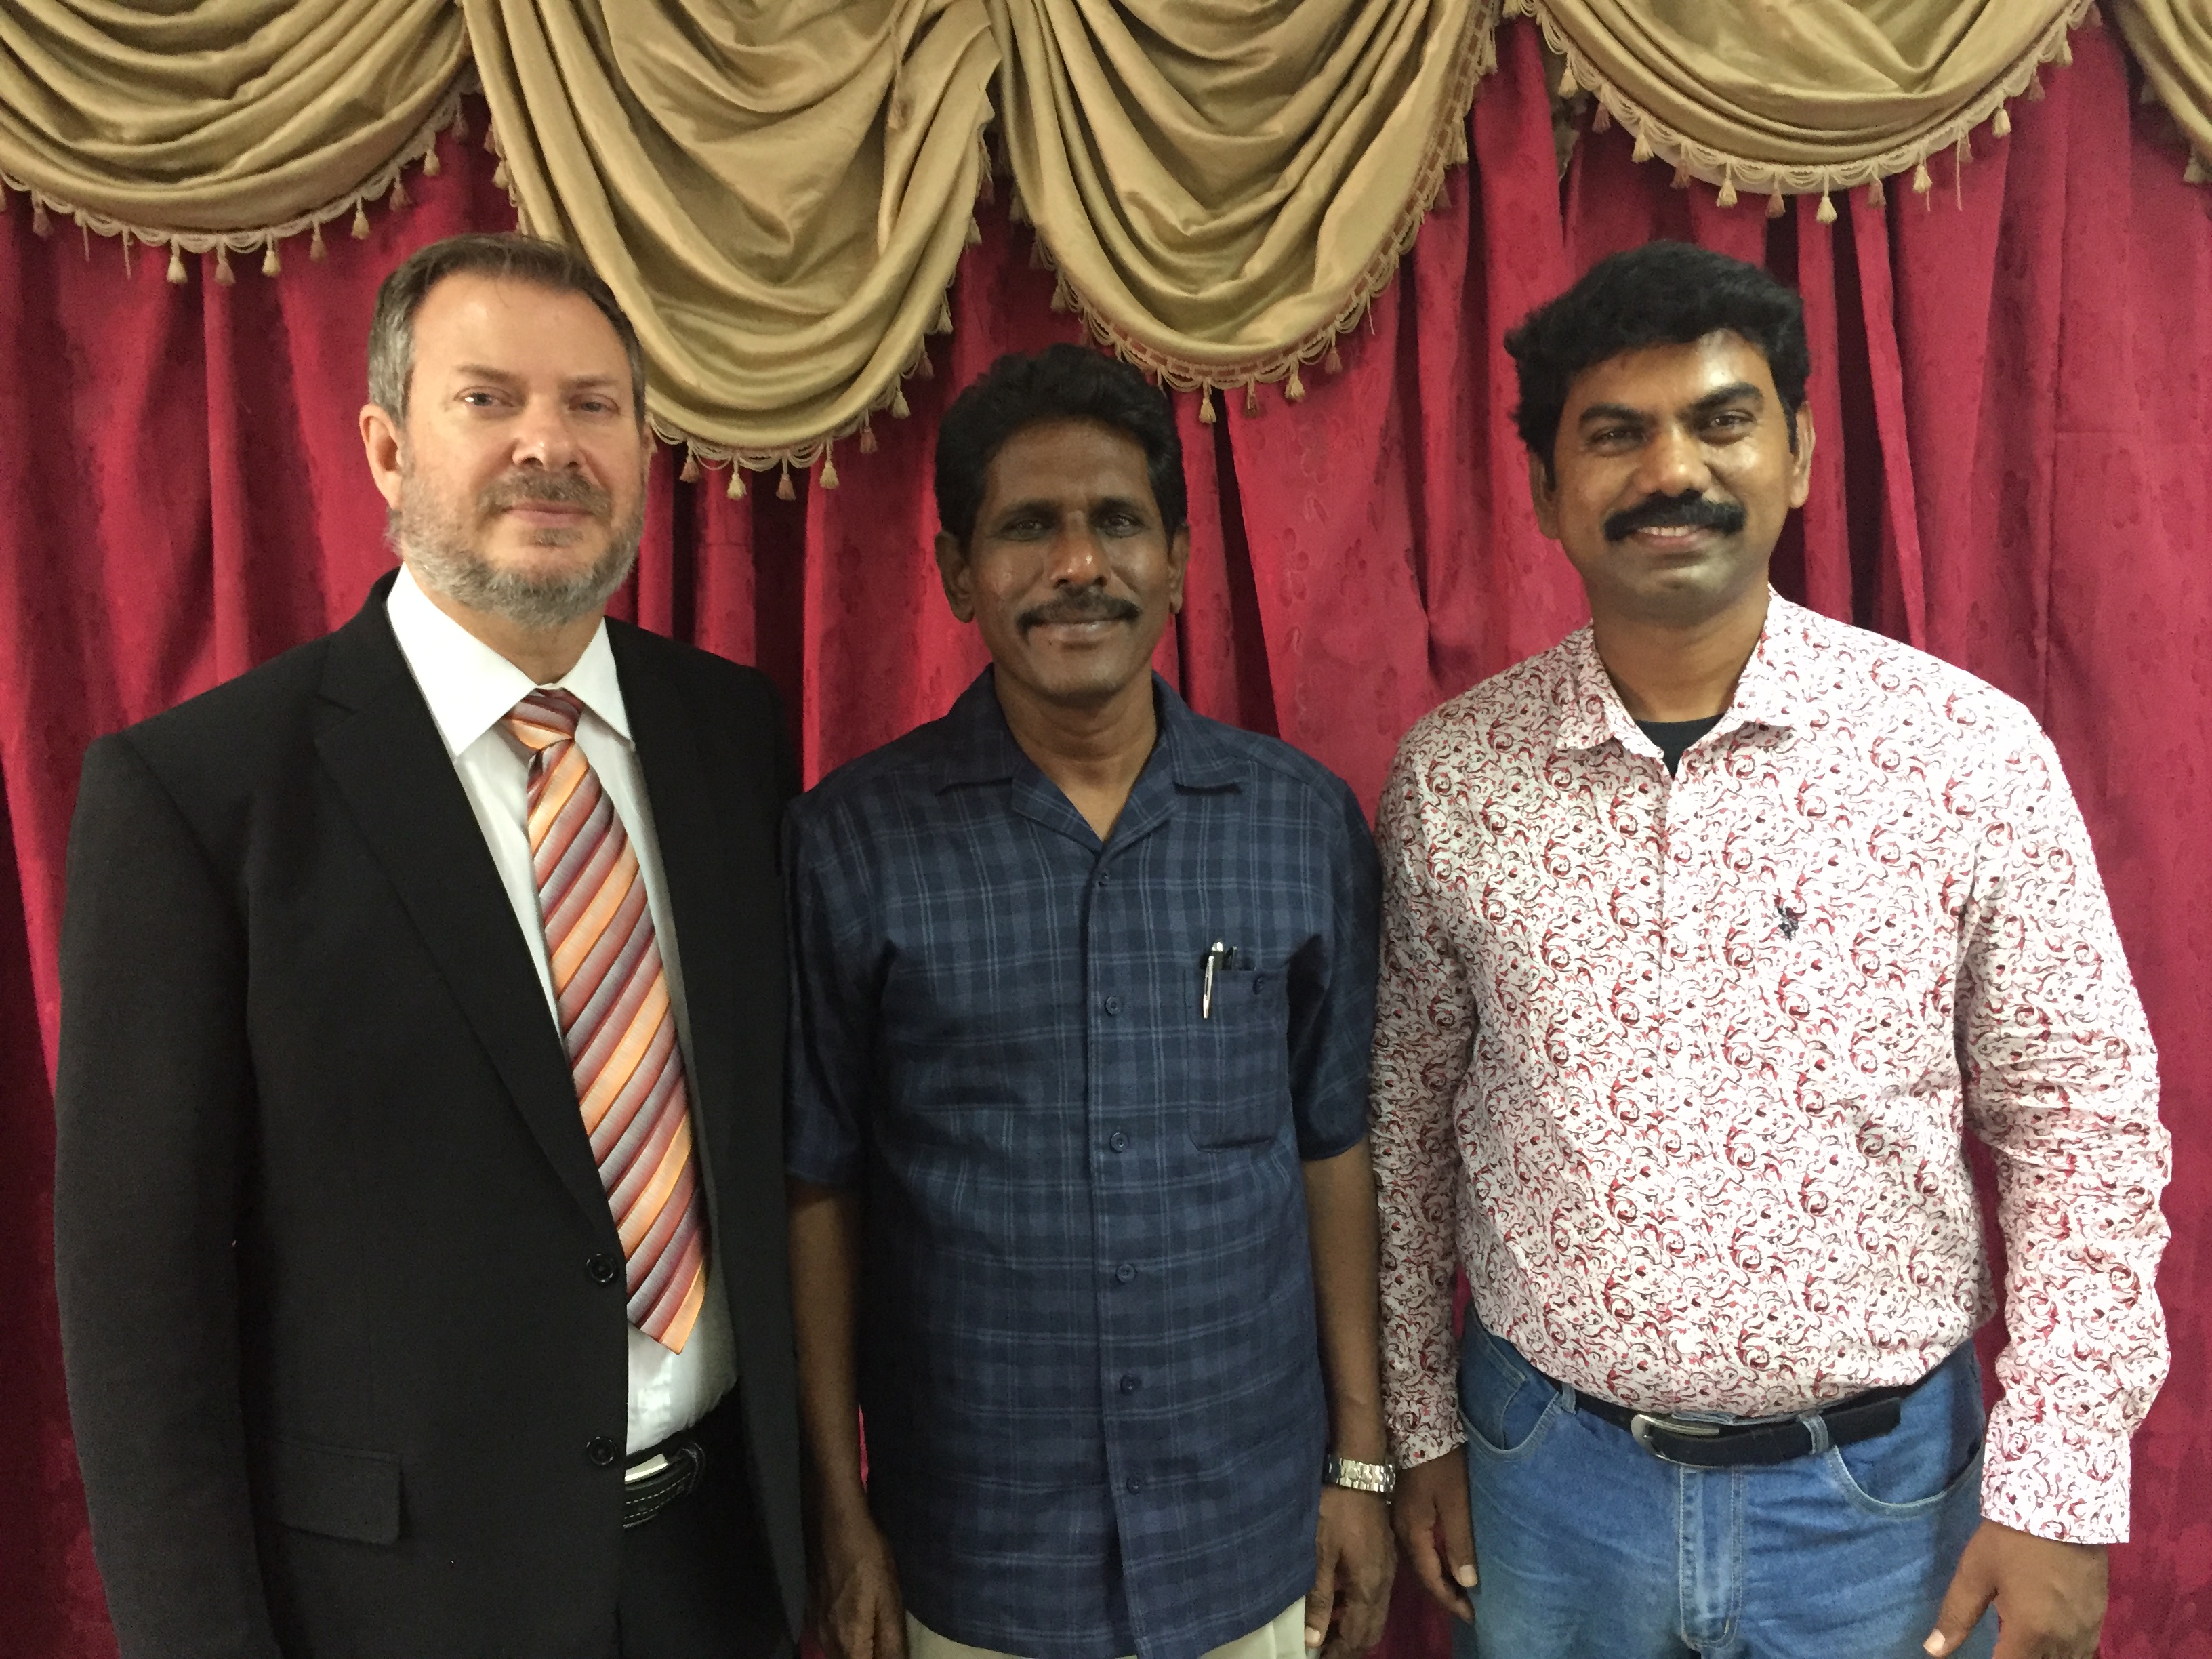 Jimmy, Pastor Jonathan and Pastor Joel in India.